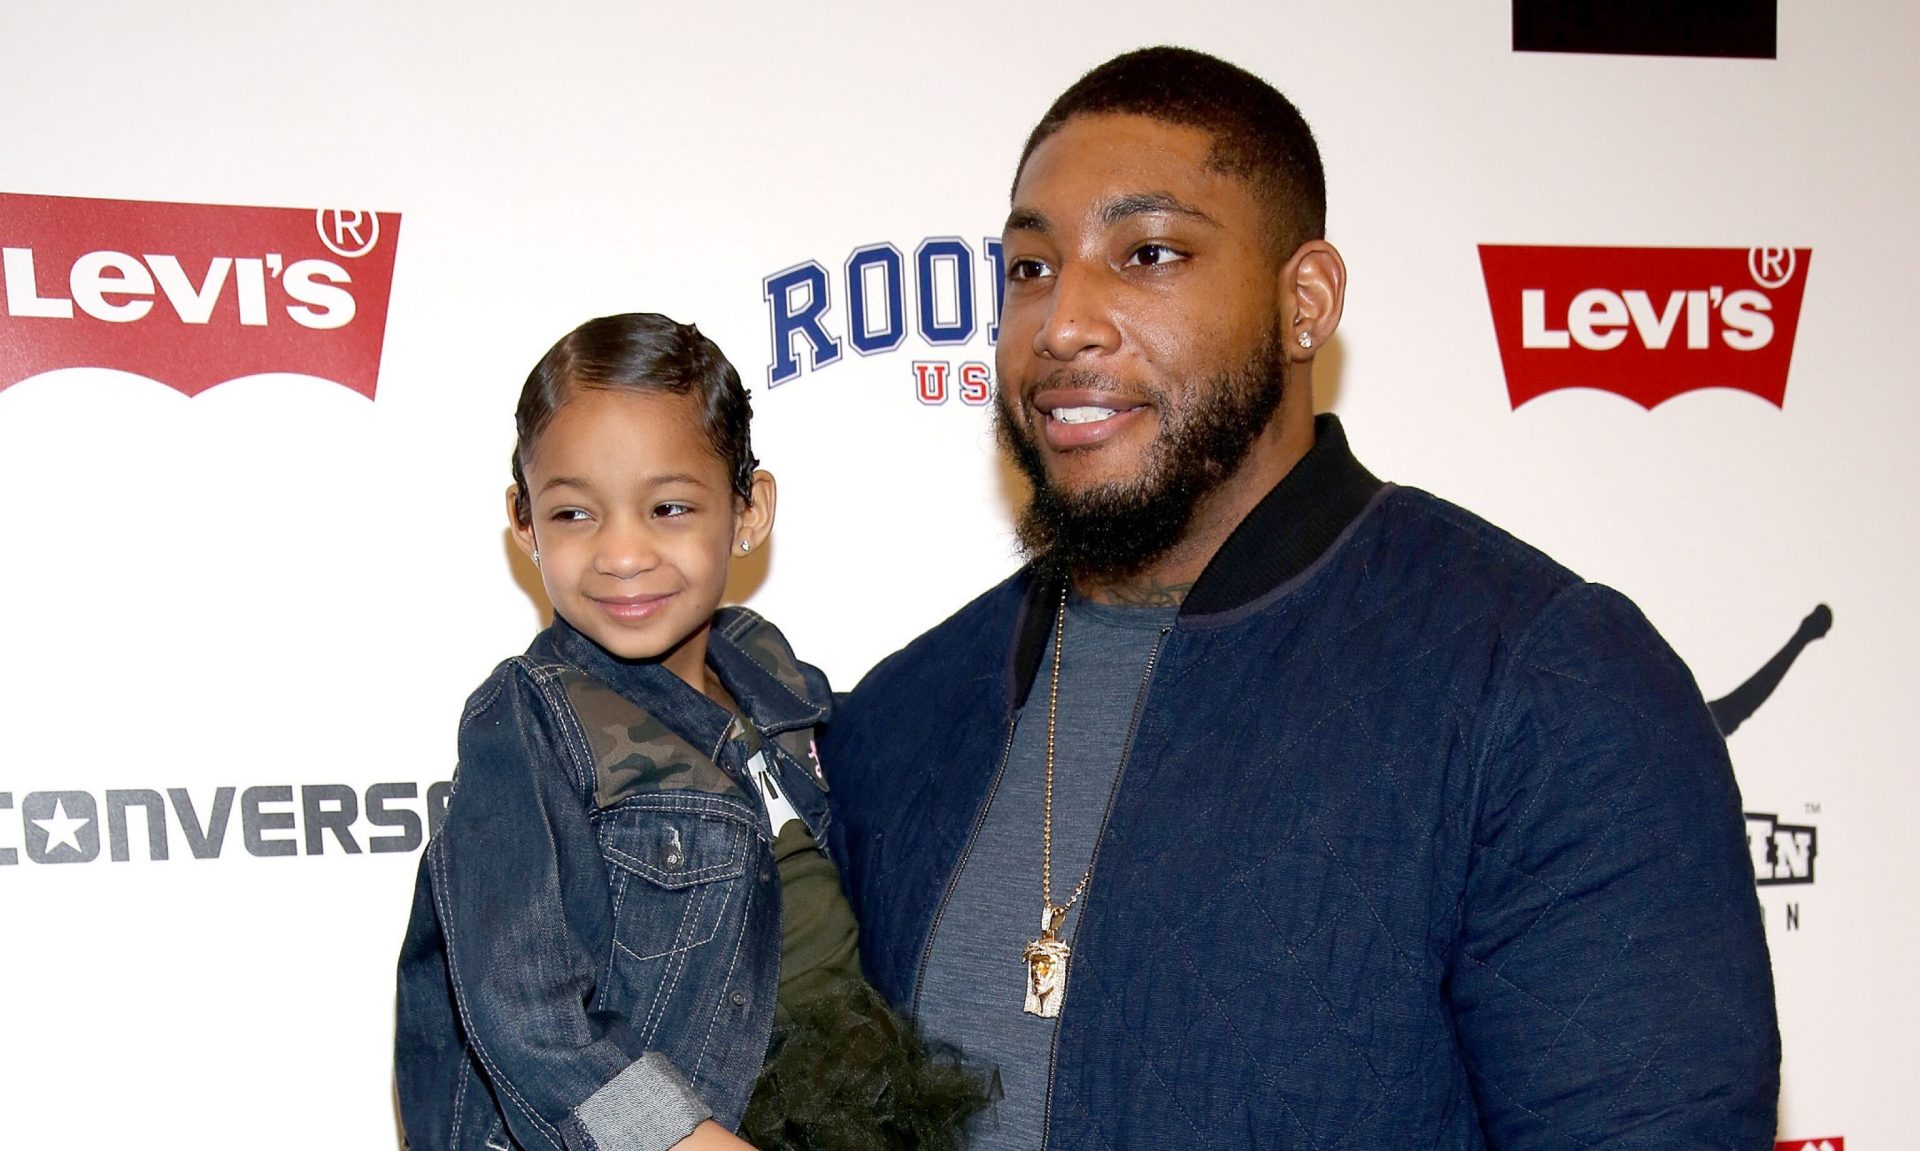 WATCH: Devon Still’s Daughter Leah Reacts To Video Of Her Journey After 8 Years Cancer-Free